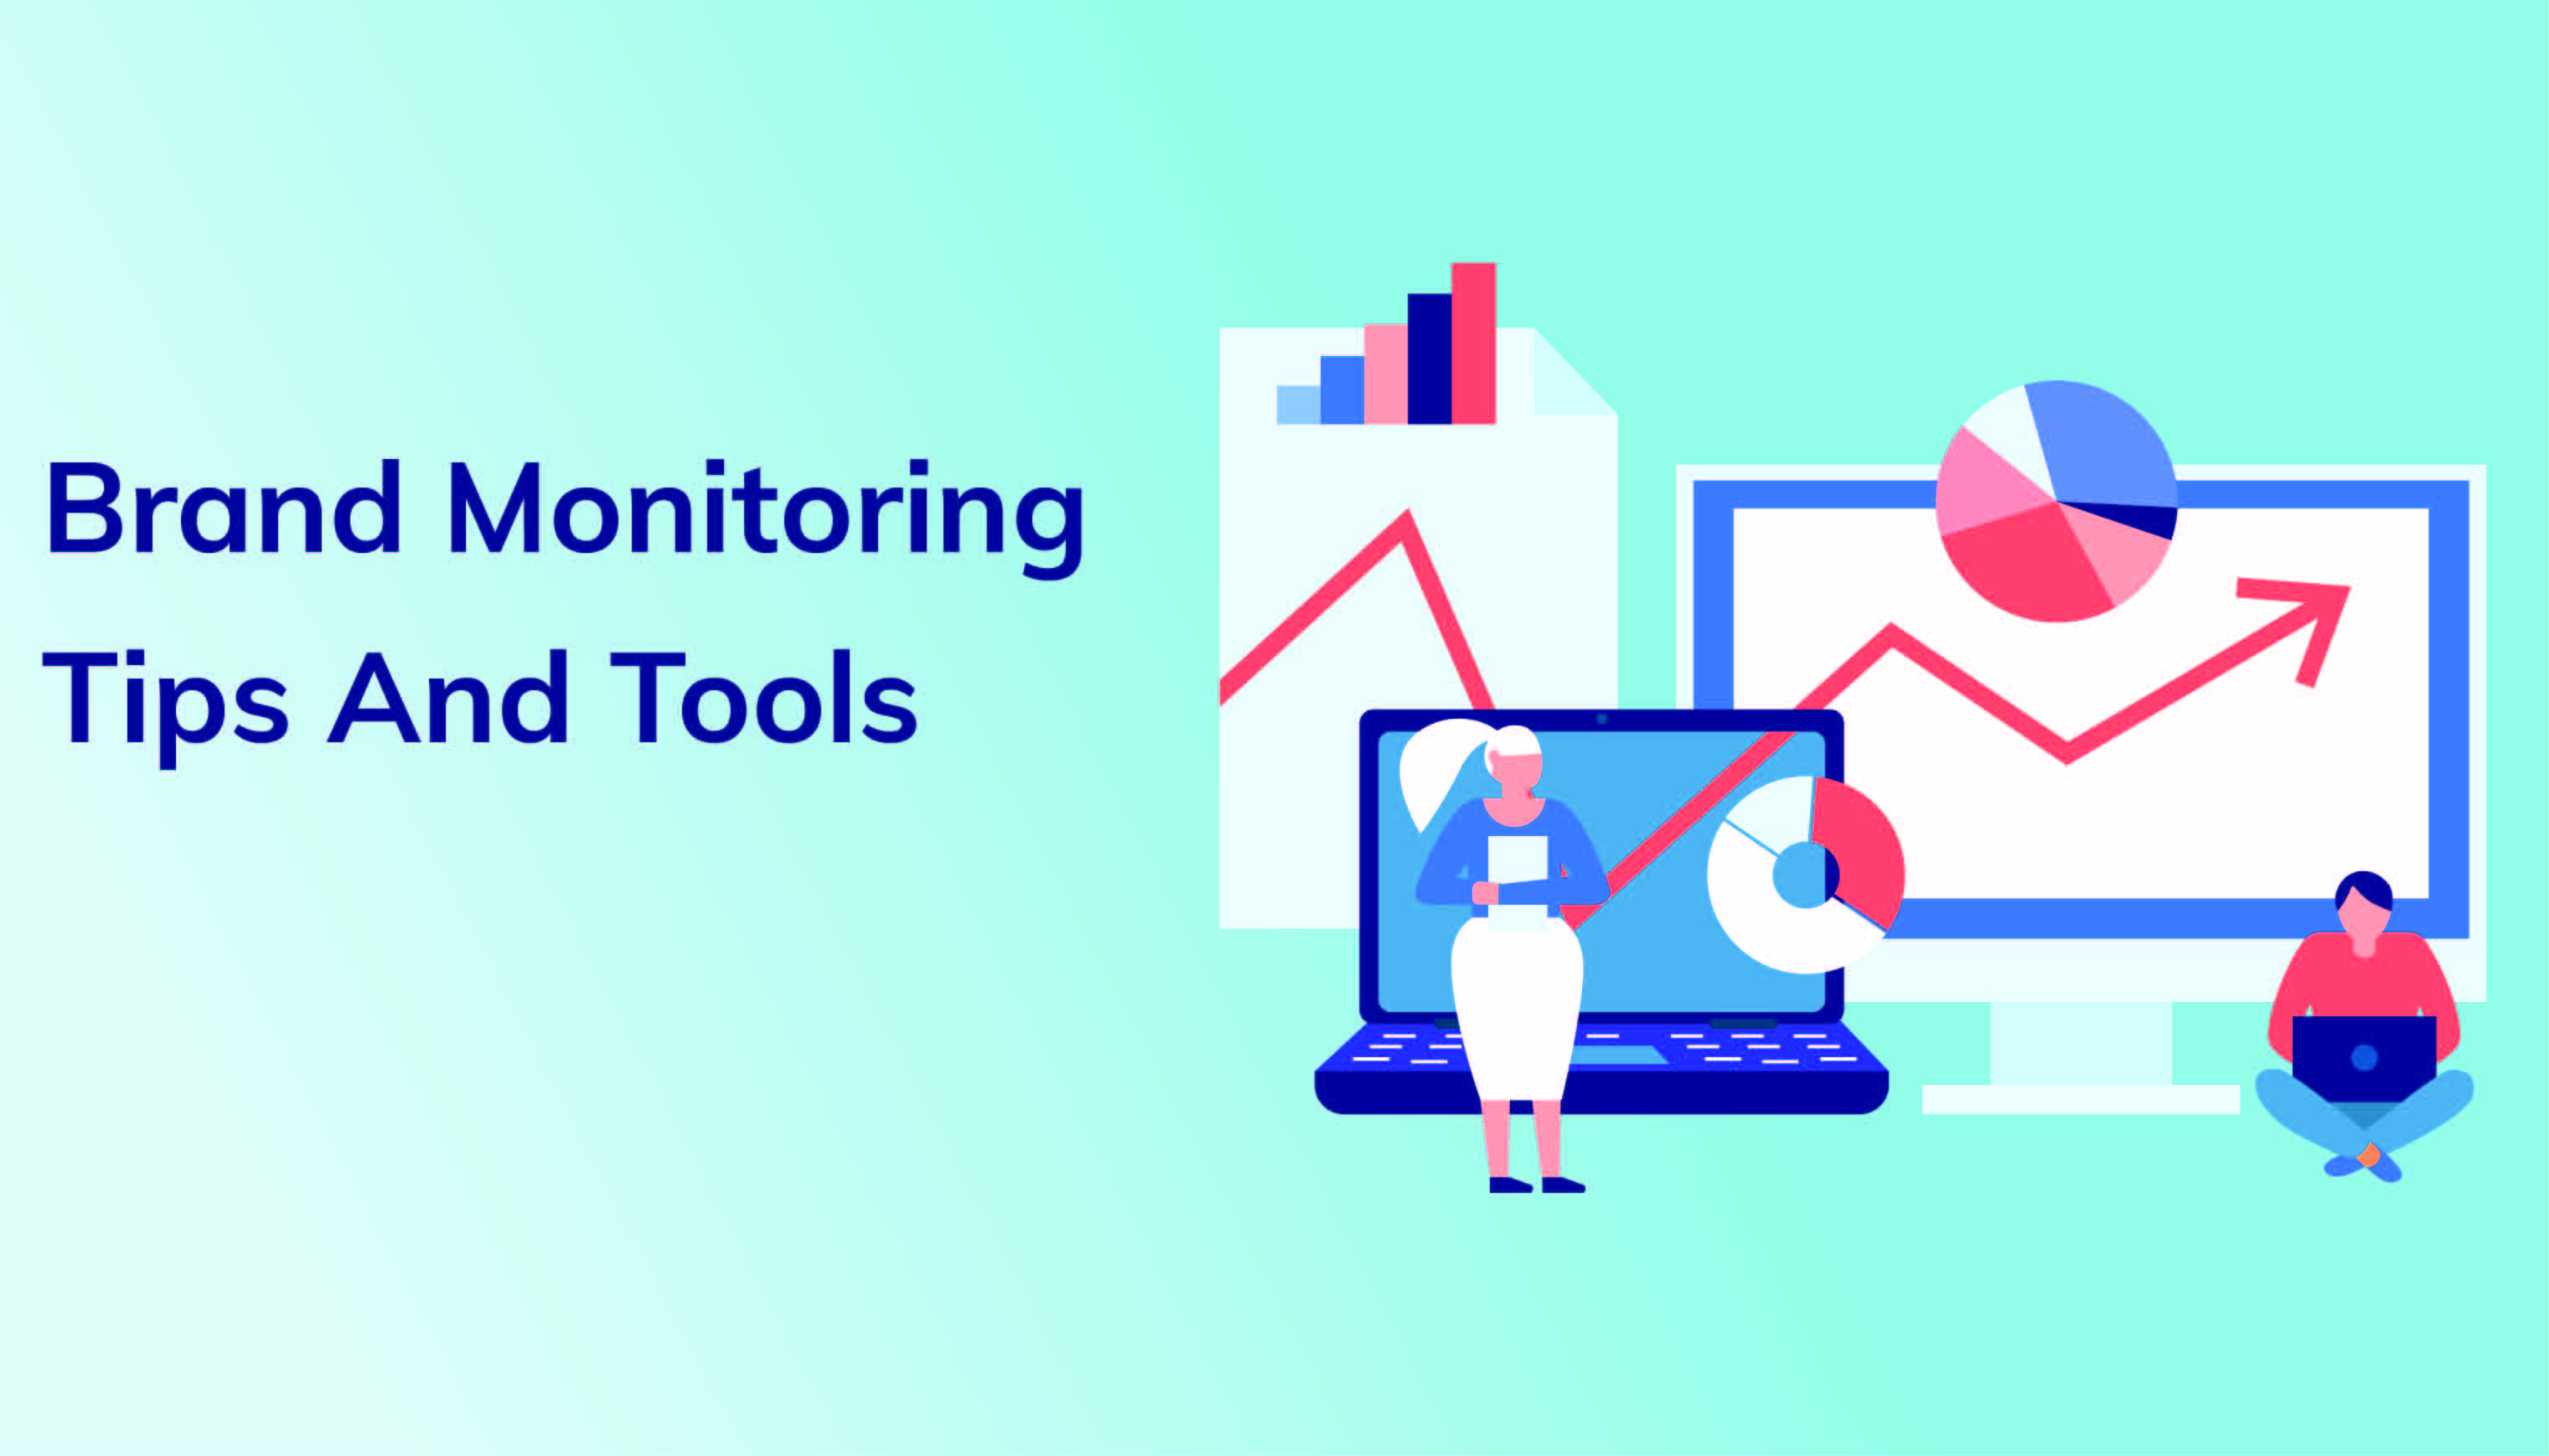 Brand Monitoring Tips And Tools – 2020 Update